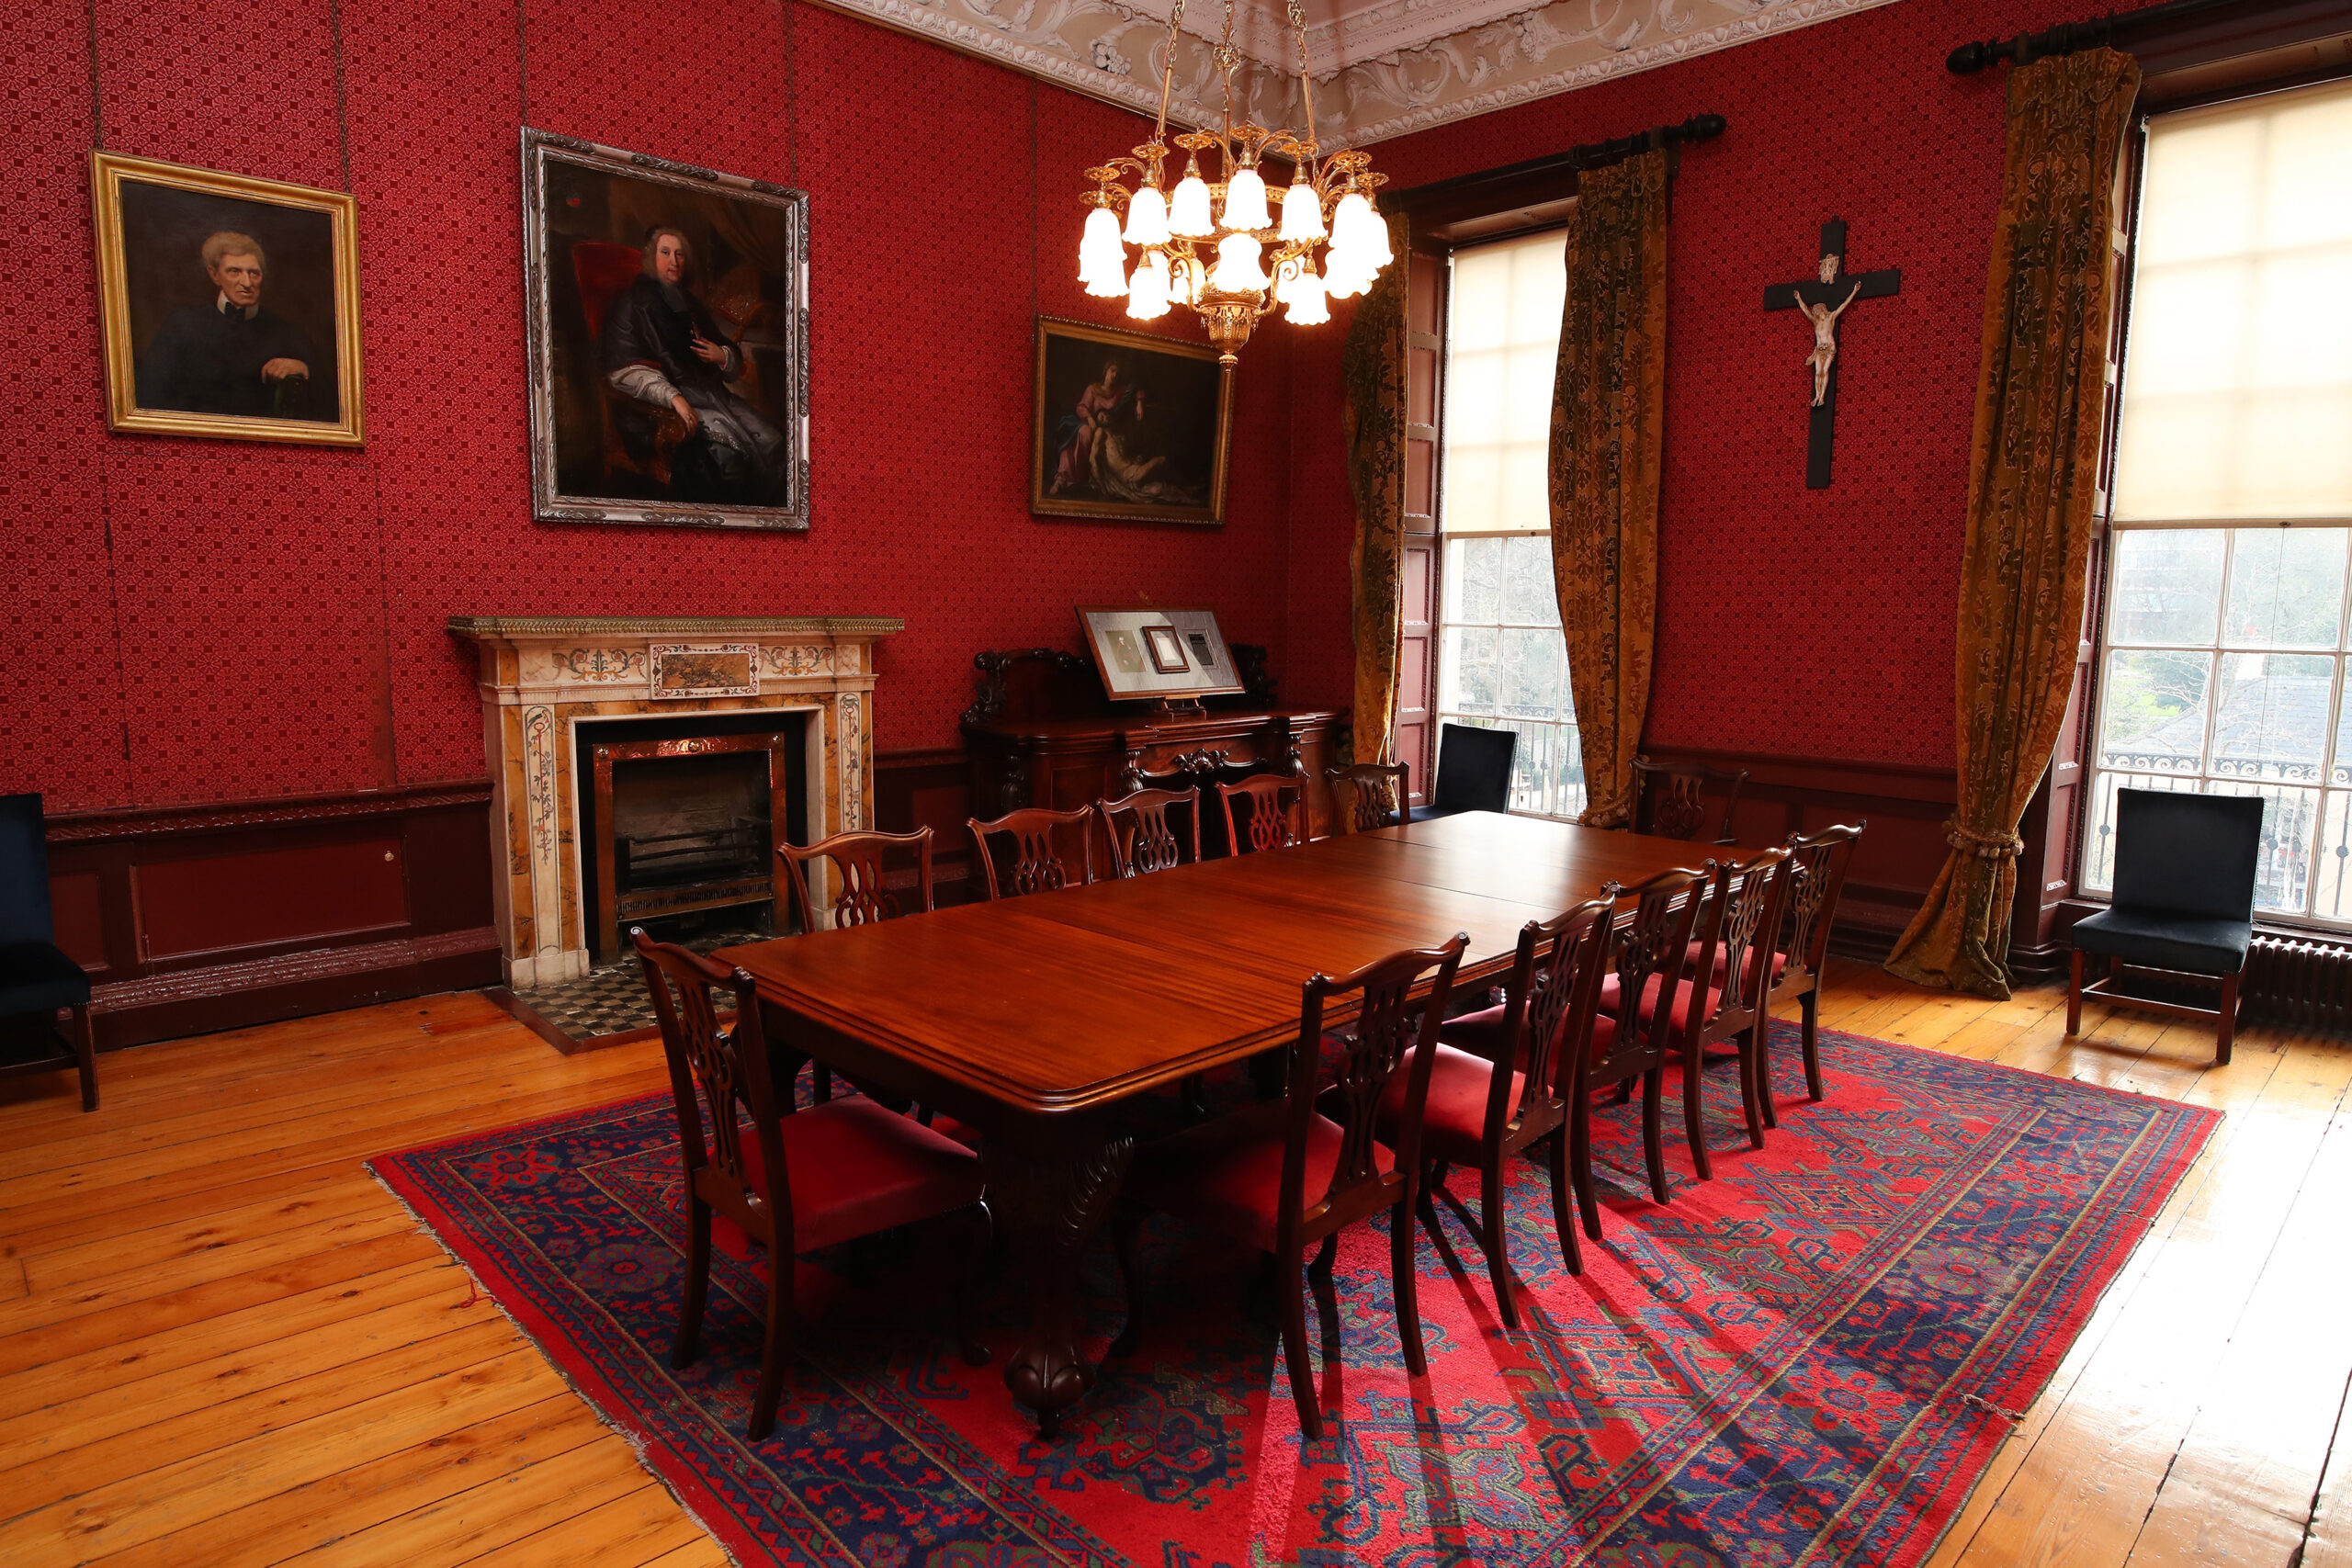 A small, dark red room with a mahogany table in the centre, placed on a dark red and blue carpet and under a large chandelier.